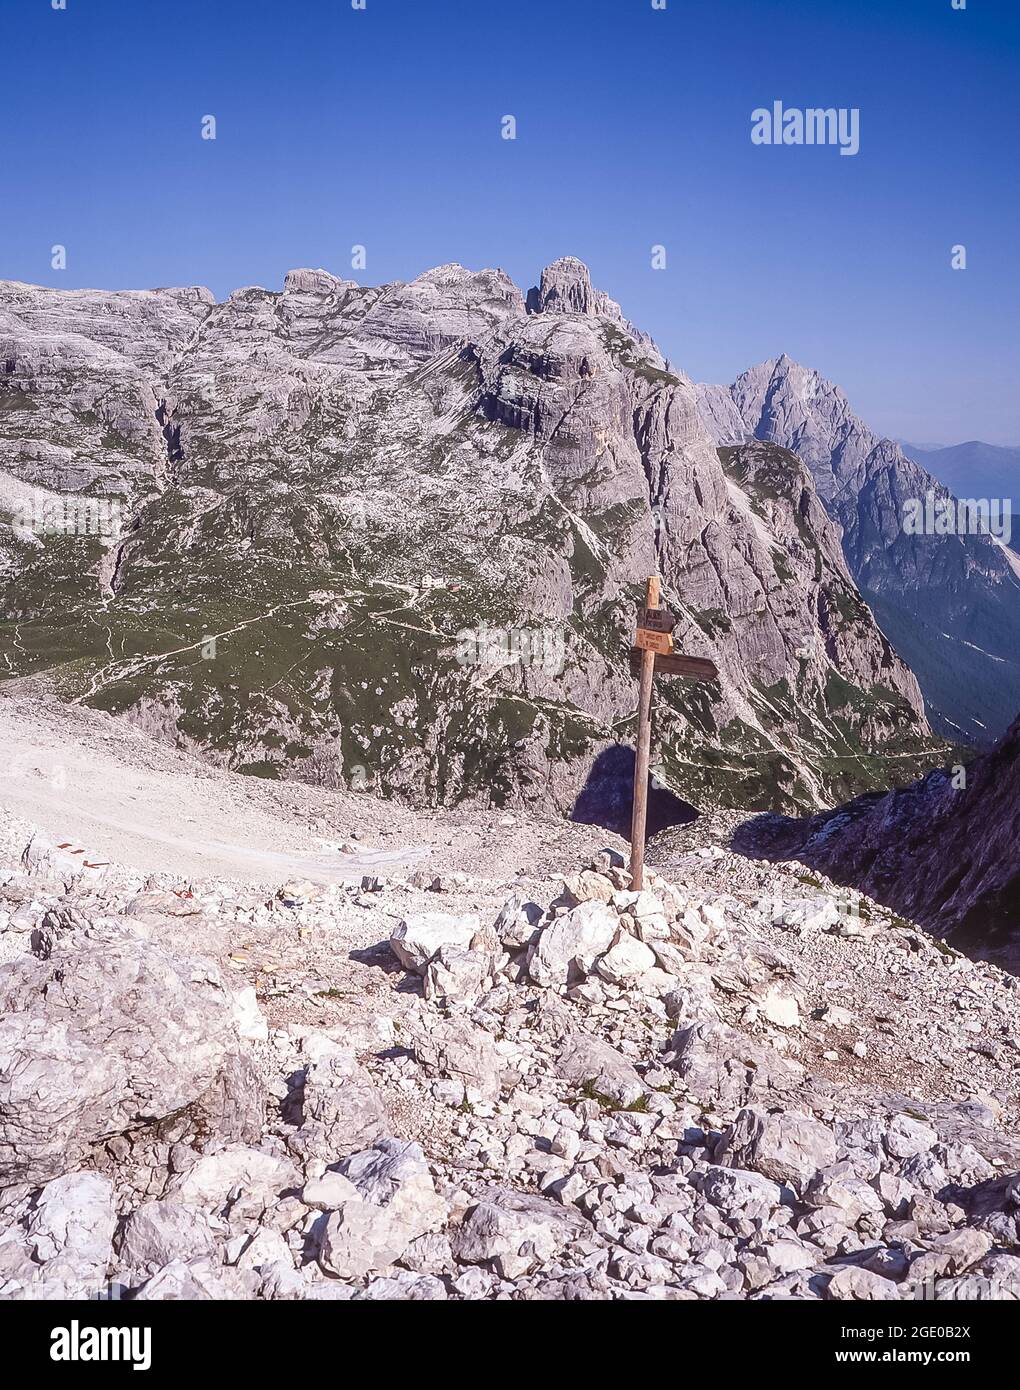 En-route to the the Italian Alpine Club CAI owned Rifugio Carducci with the Comici-Zsigmondy mountain refuge in the far distance above the Fischleintal valley of the Sexton-Sesto Dolomites region of the Italian Dolomites, the Alto Adige of the Sud Tyrol Stock Photo